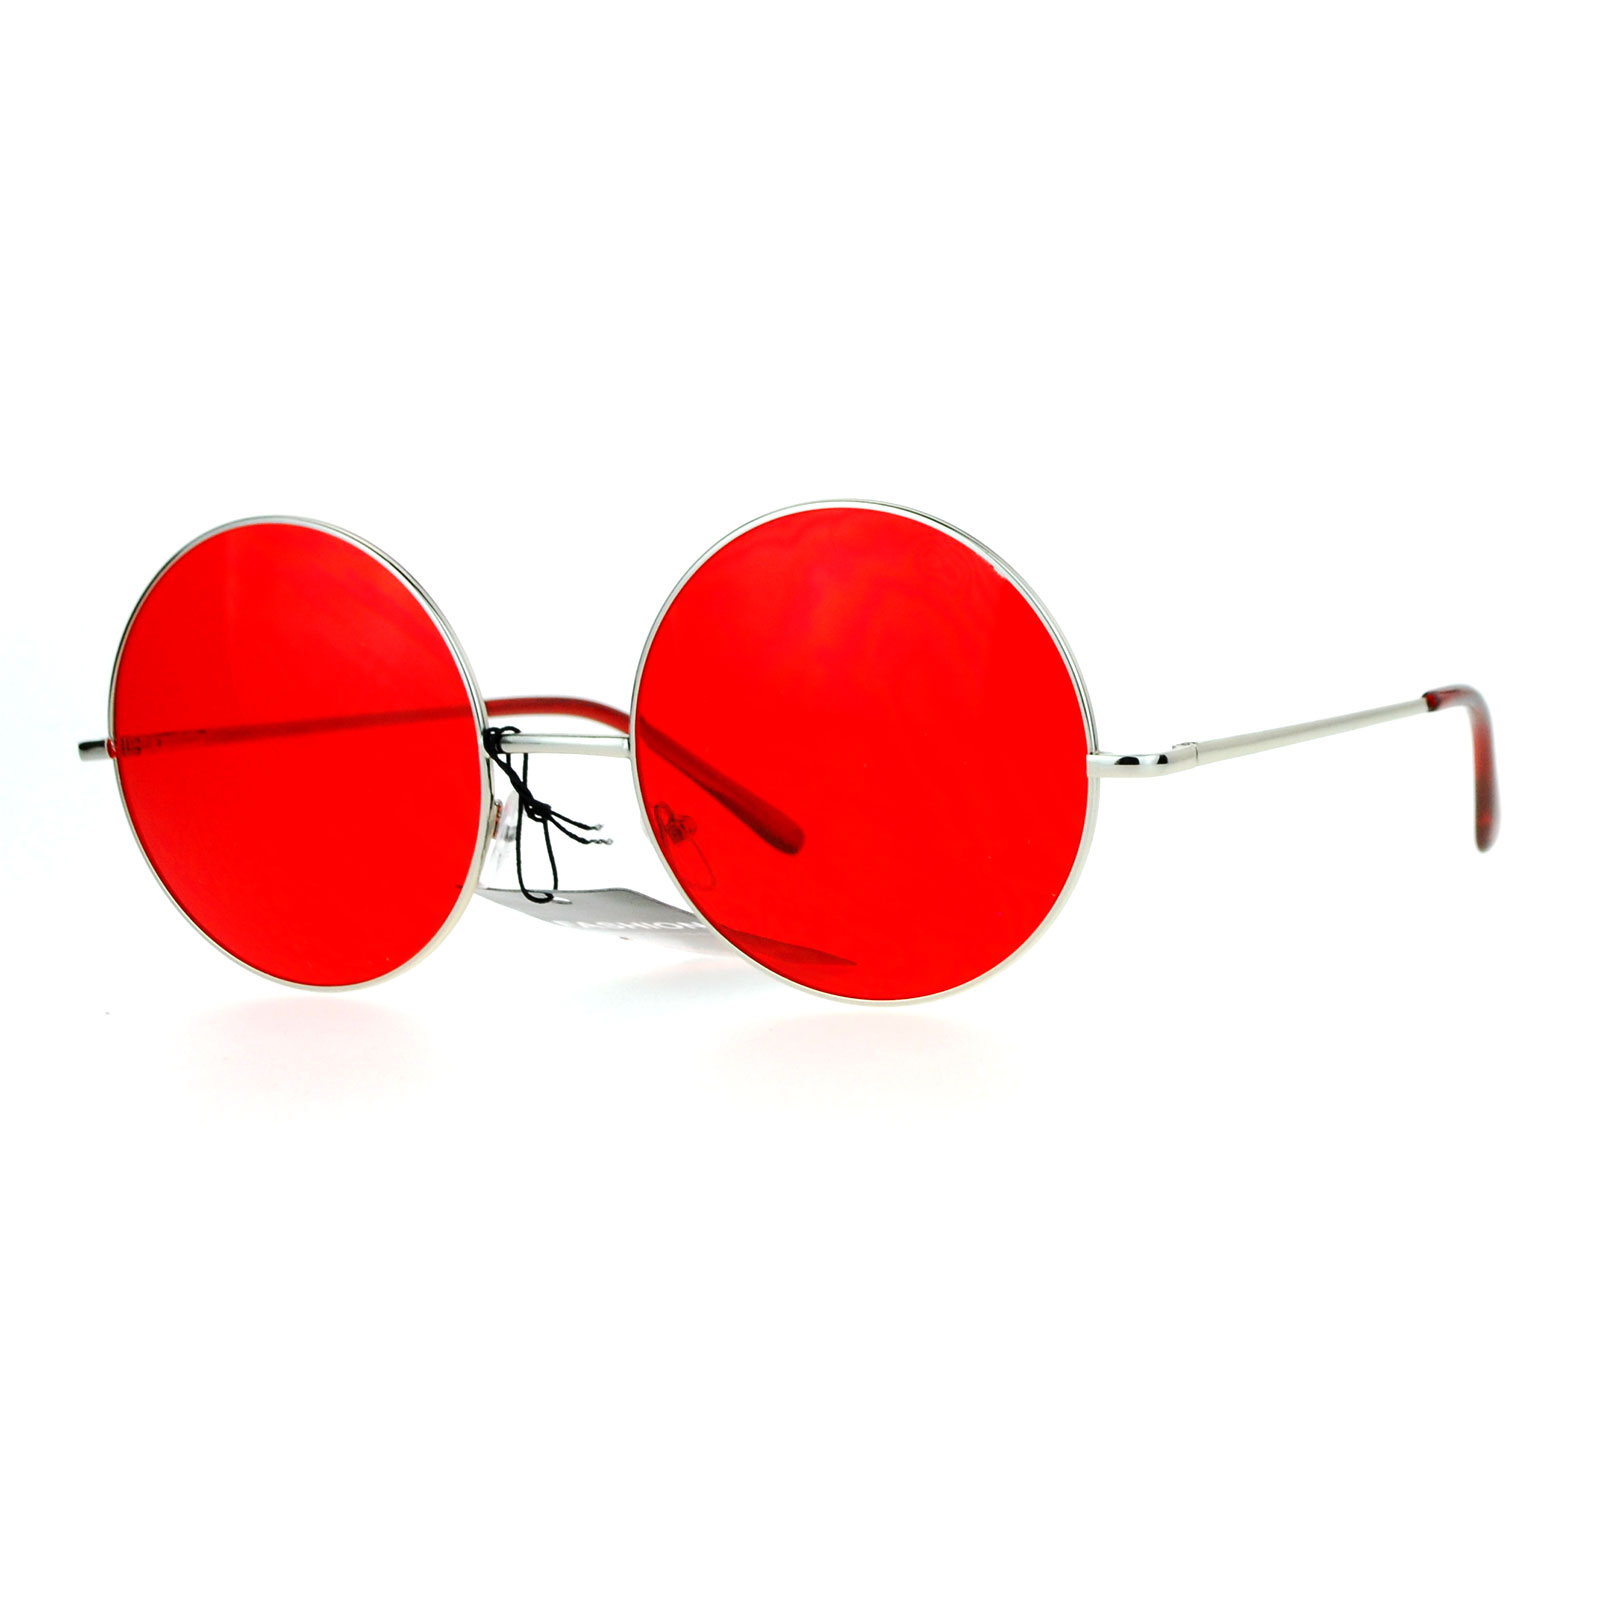 SA106 Hippie Oceanic Gradient Large Circle Lens Sunglasses Red - image 2 of 3